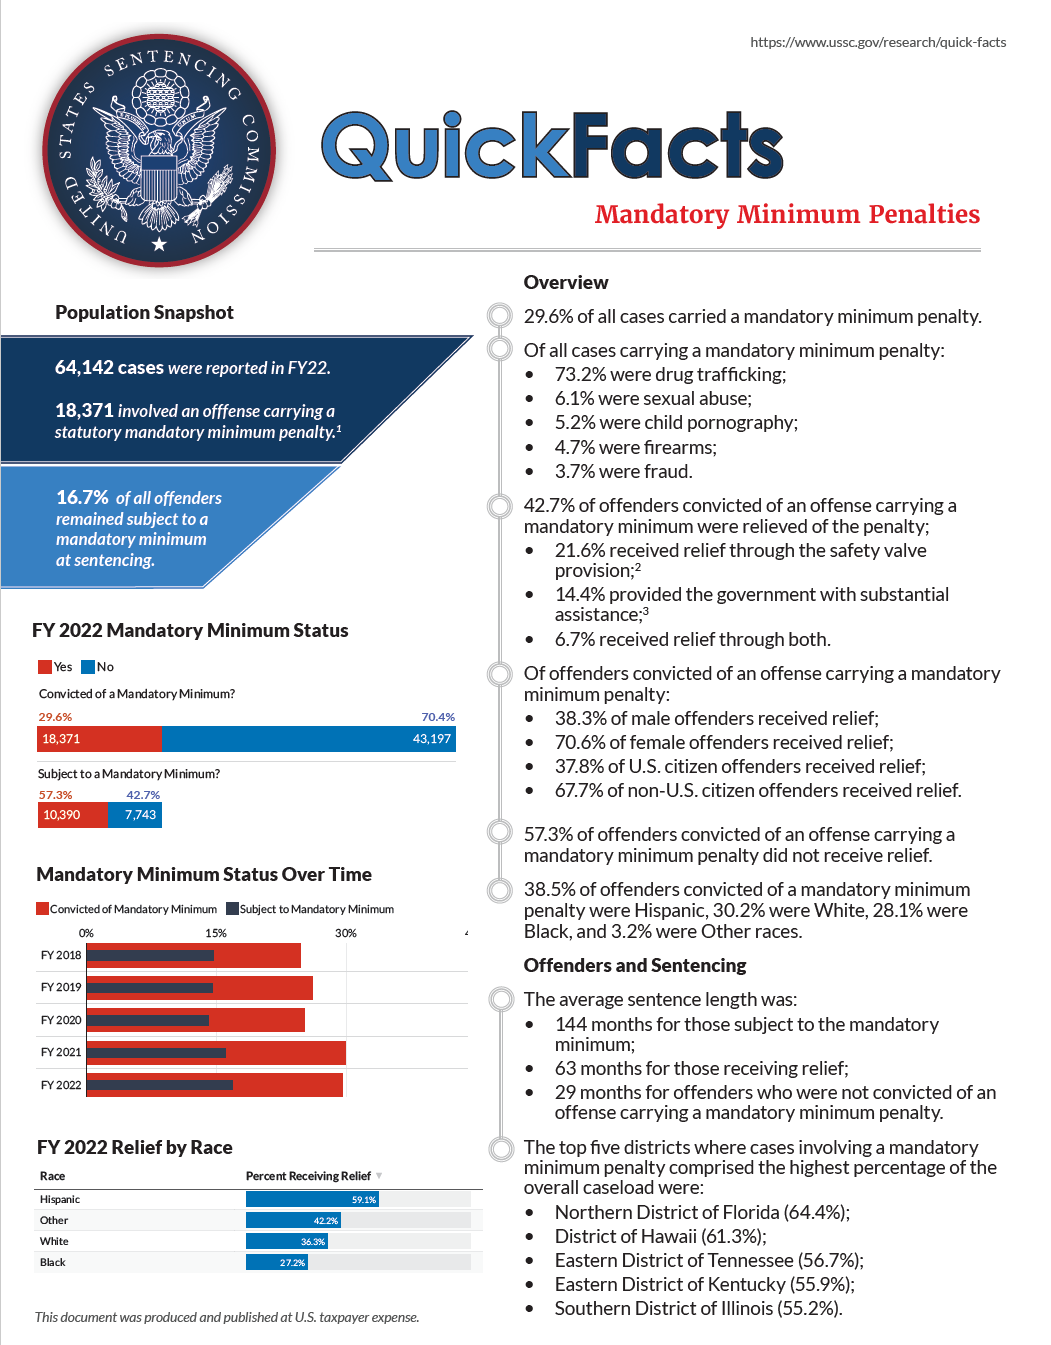 "Cover of the Quick Facts handout"